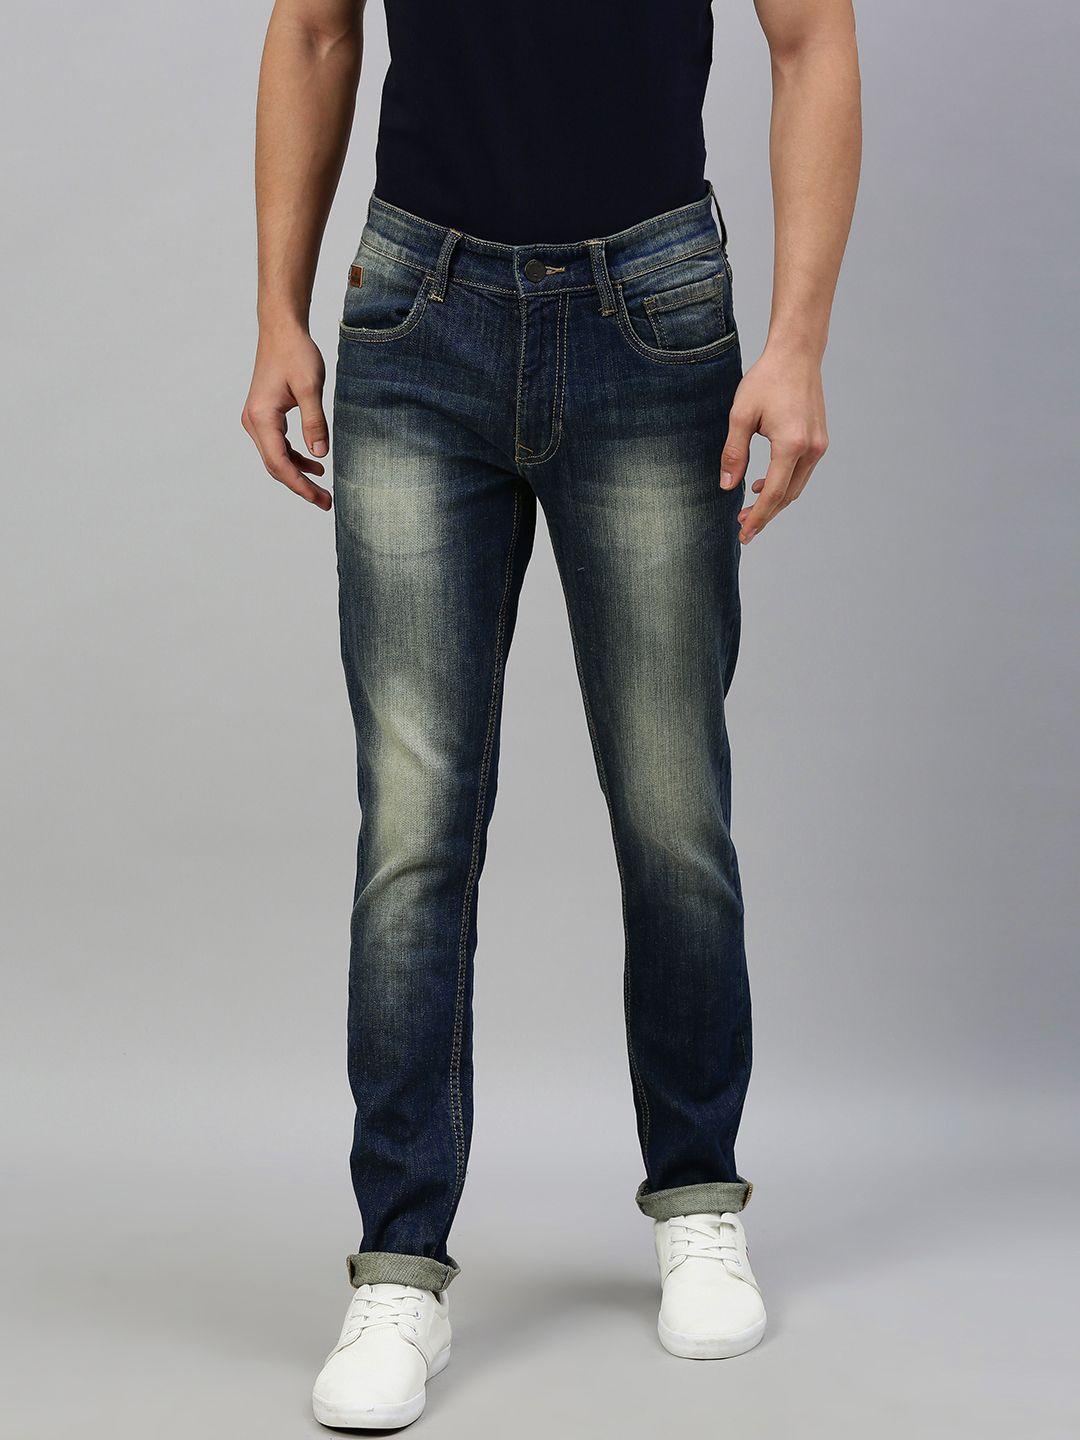 WROGN Men Blue Skinny Fit Mid-Rise Clean Look Stretchable Jeans